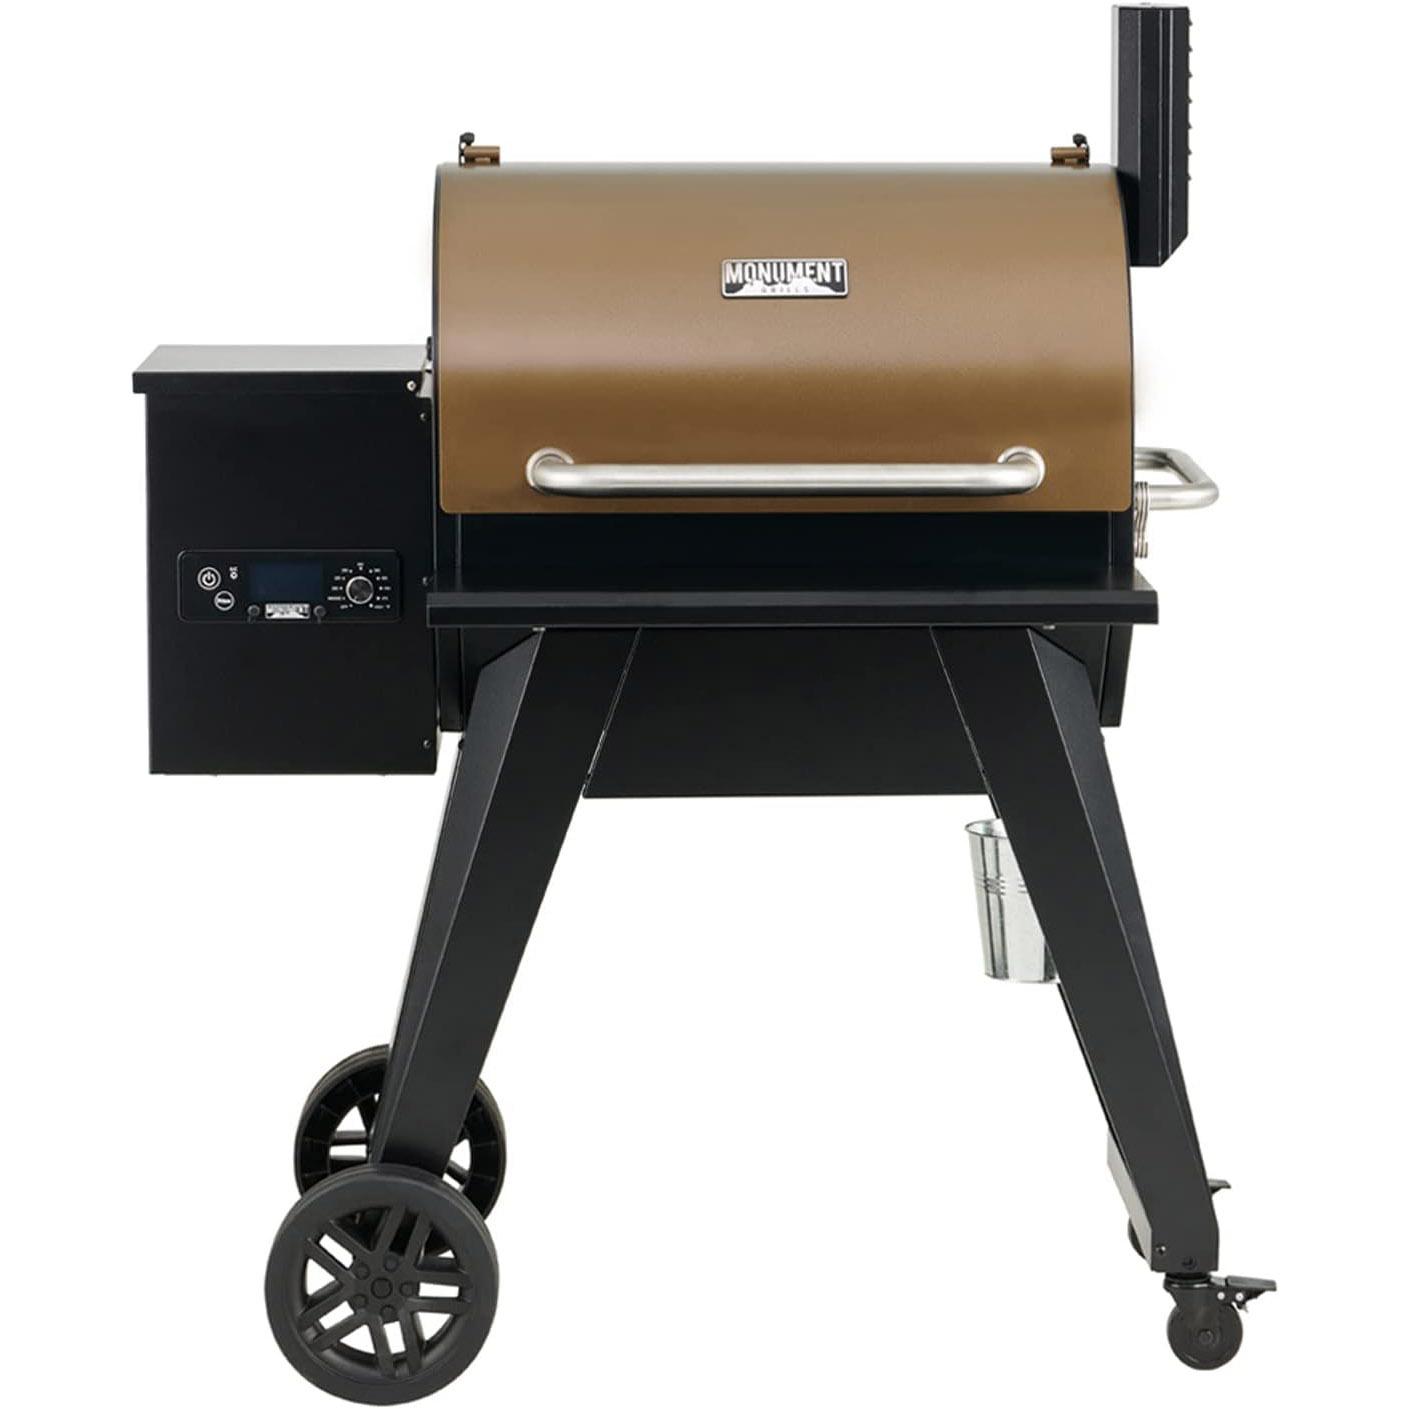 Monument Grills 86030 Wood Pellet Grill and Smoker for $199.45 Shipped